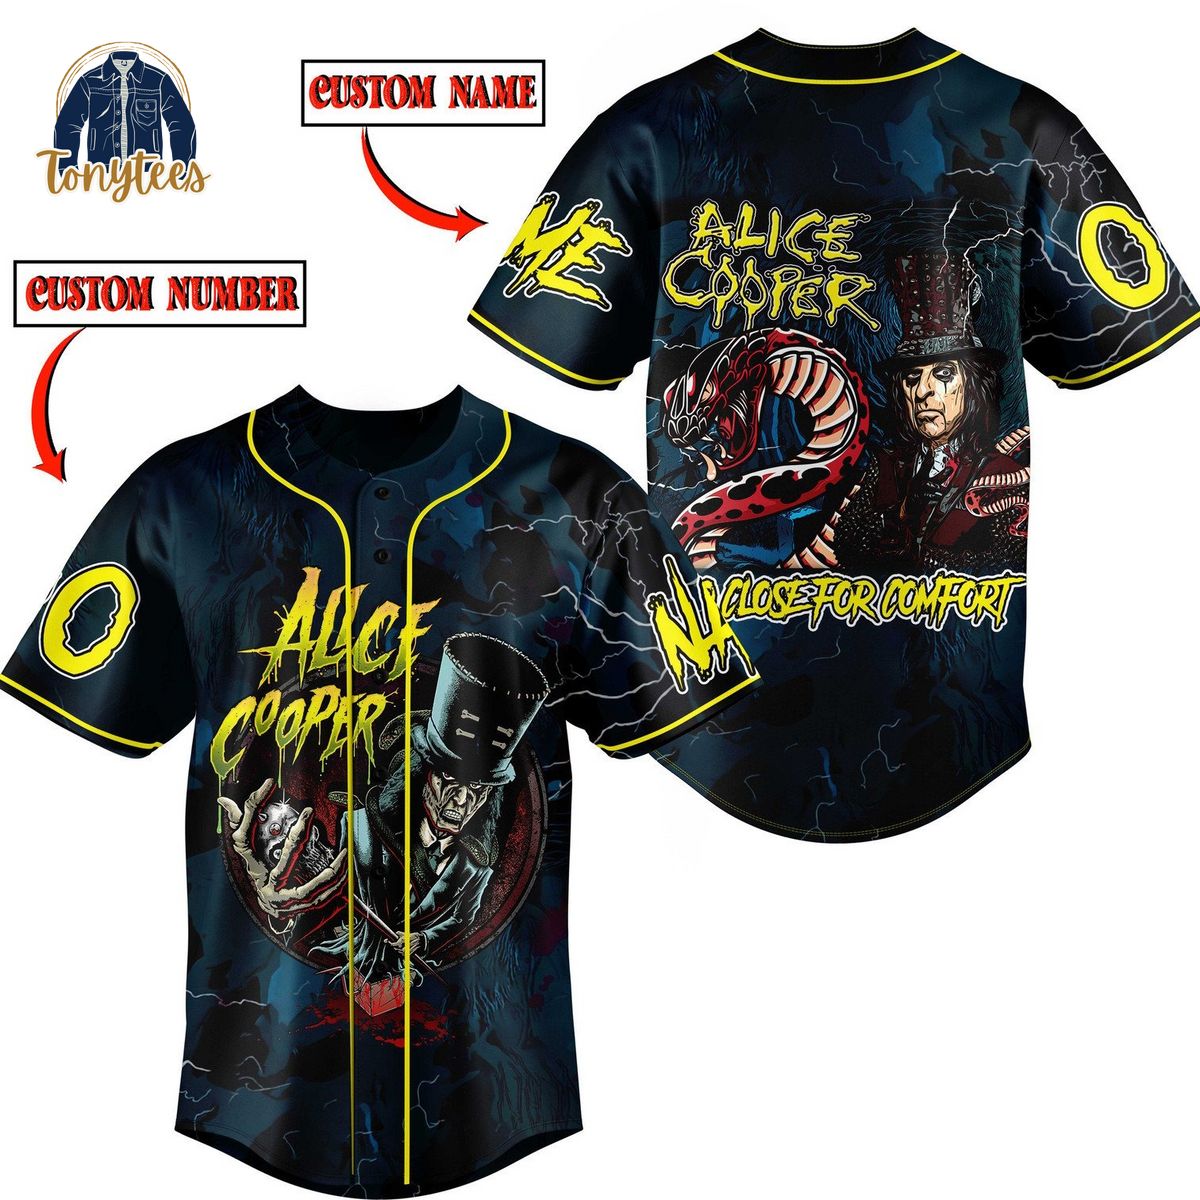 Alice Cooper too close for comfort custome name baseball jersey